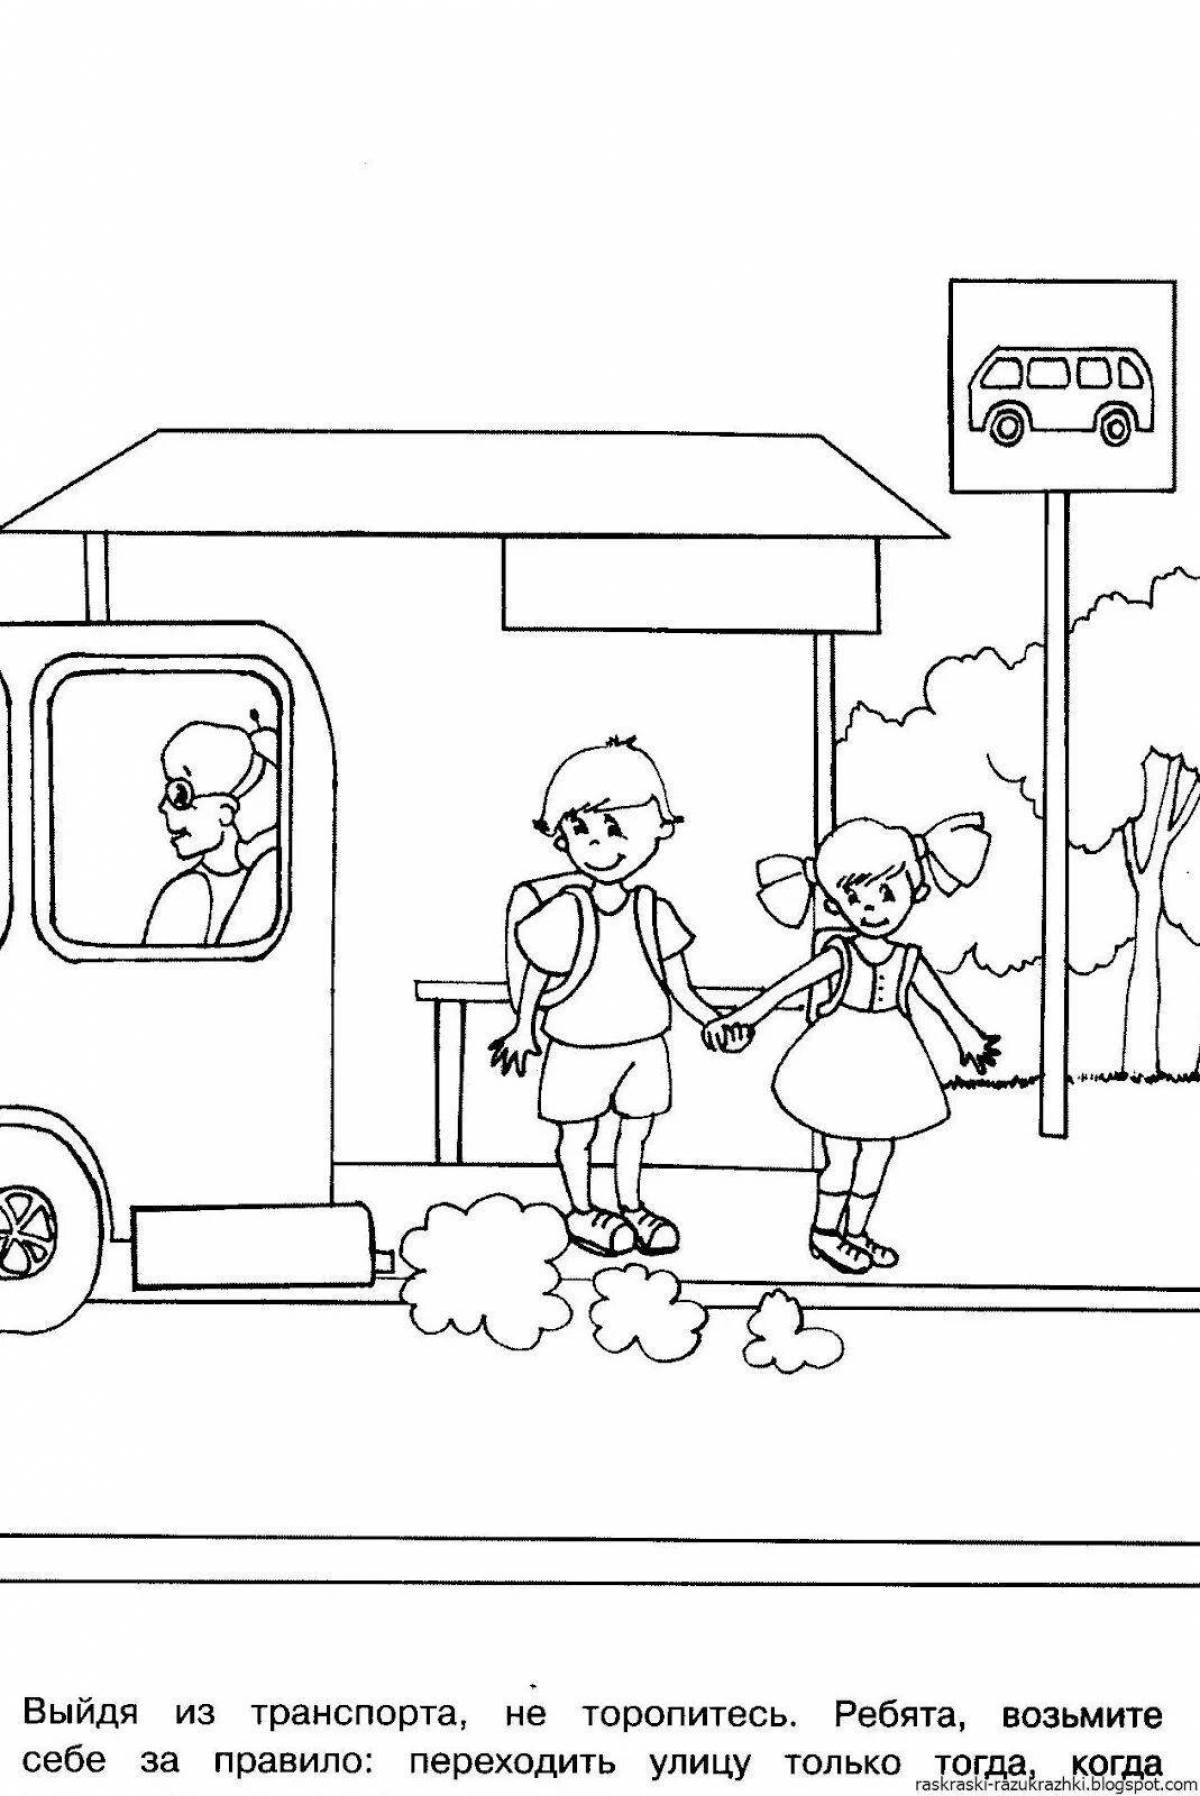 1st grade humorous rules of the road coloring book